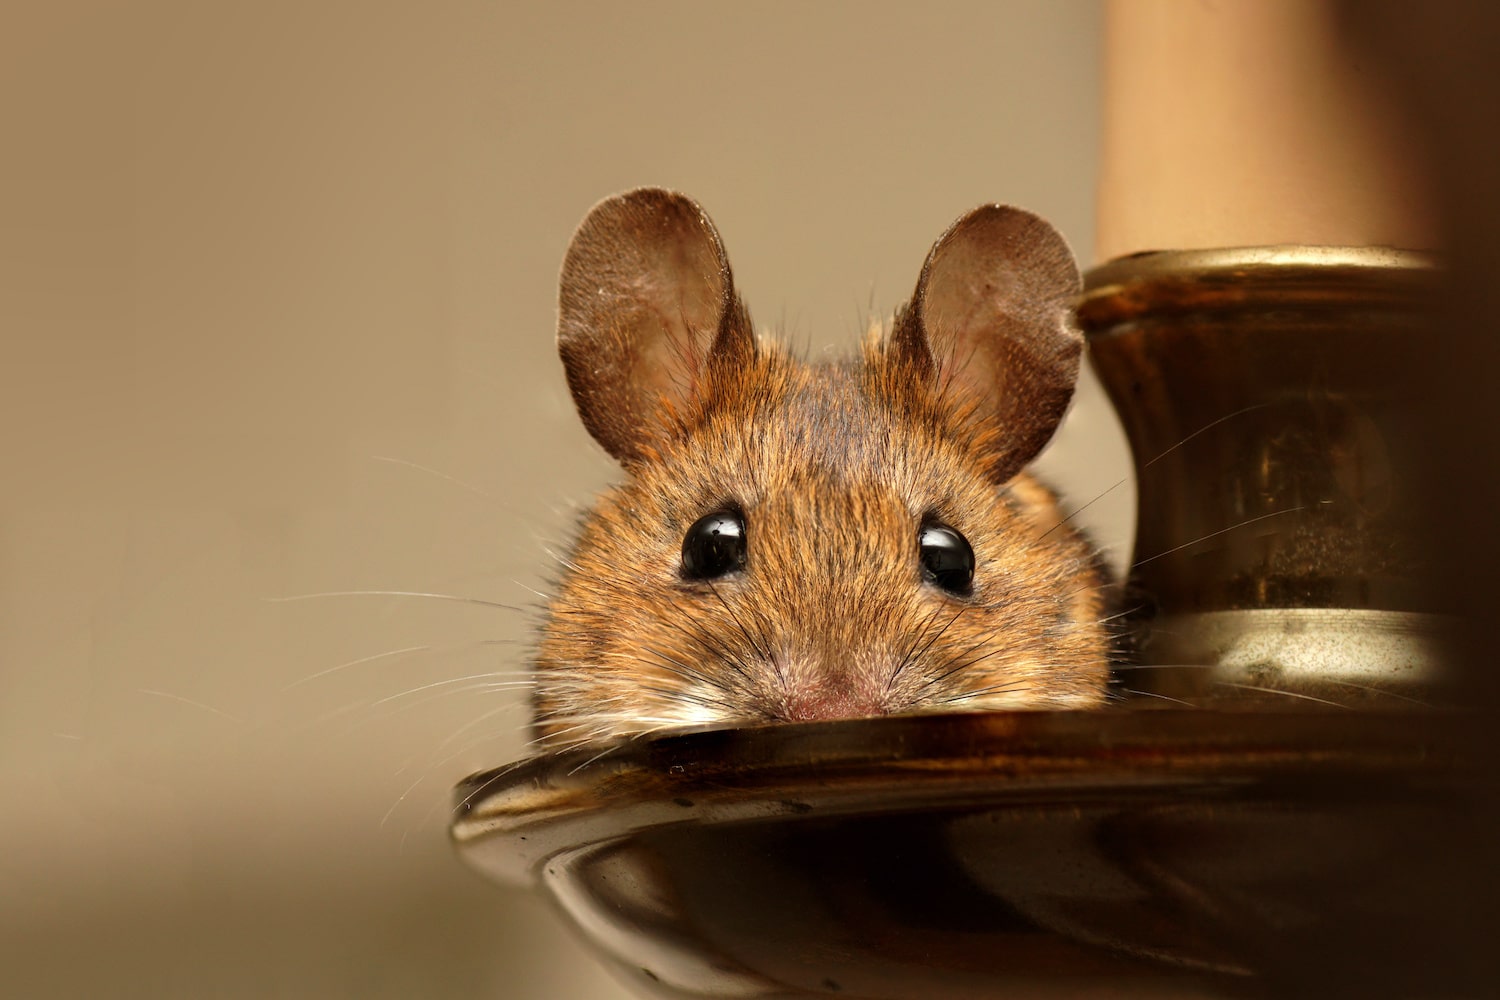 How Long Does It Take to Clean Up a Rodent Infestation in South Florida